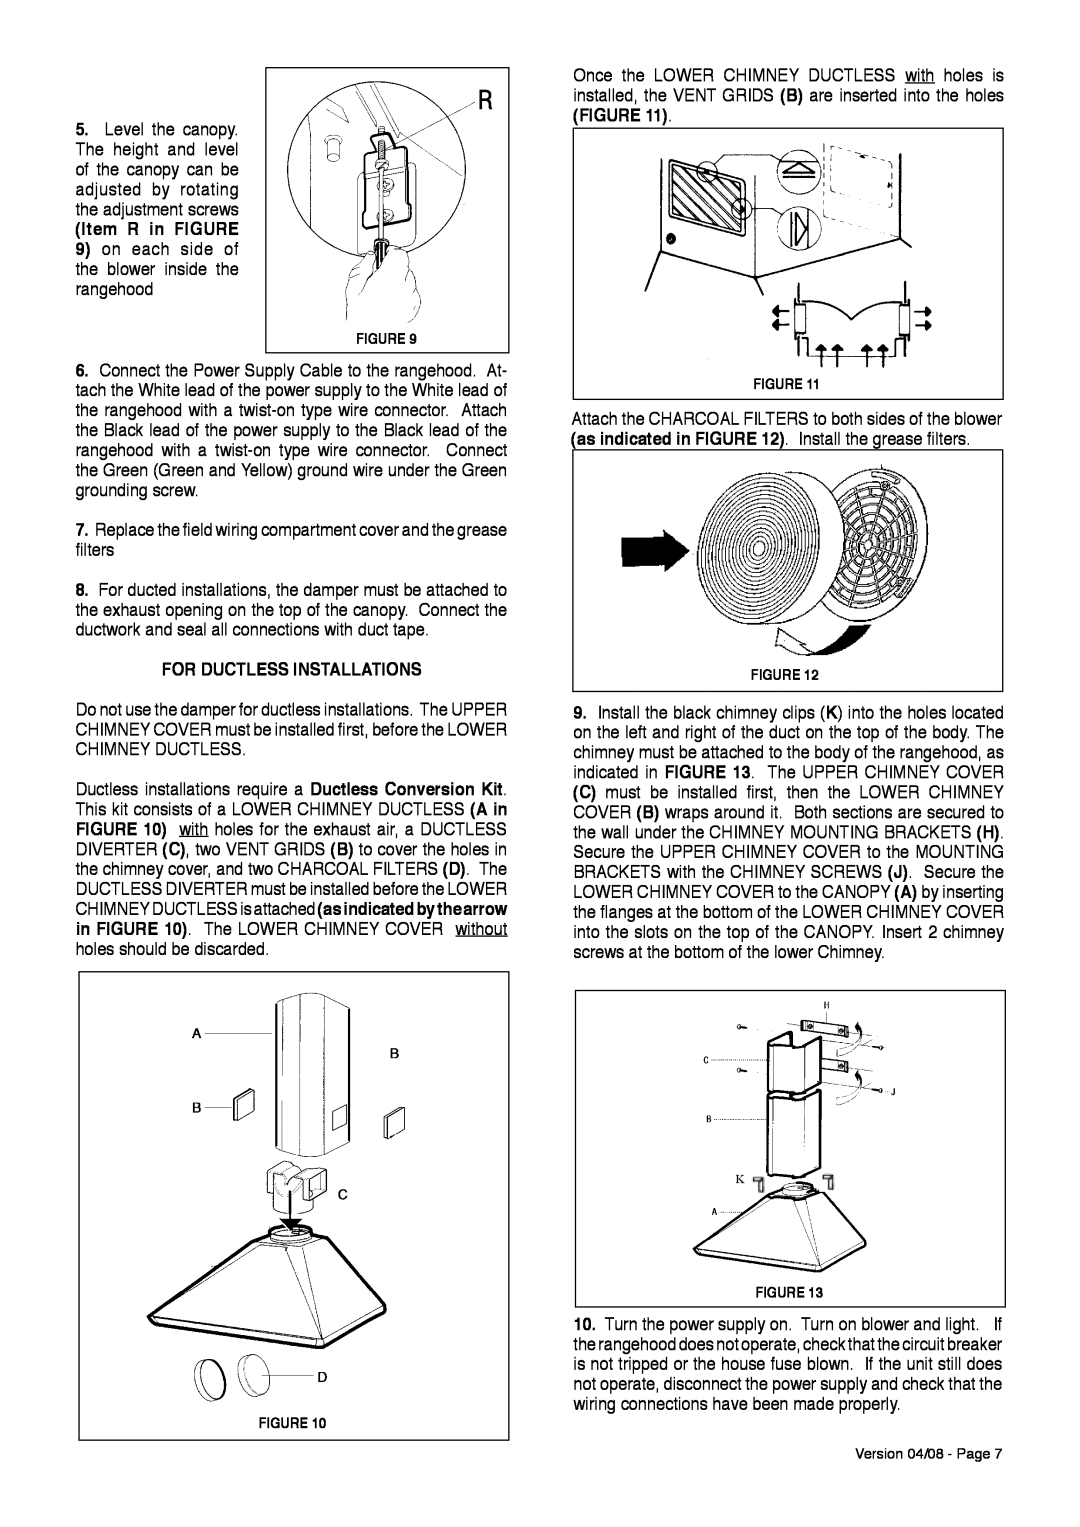 Faber 36 installation instructions Item R in FIGURE, For Ductless Installations 